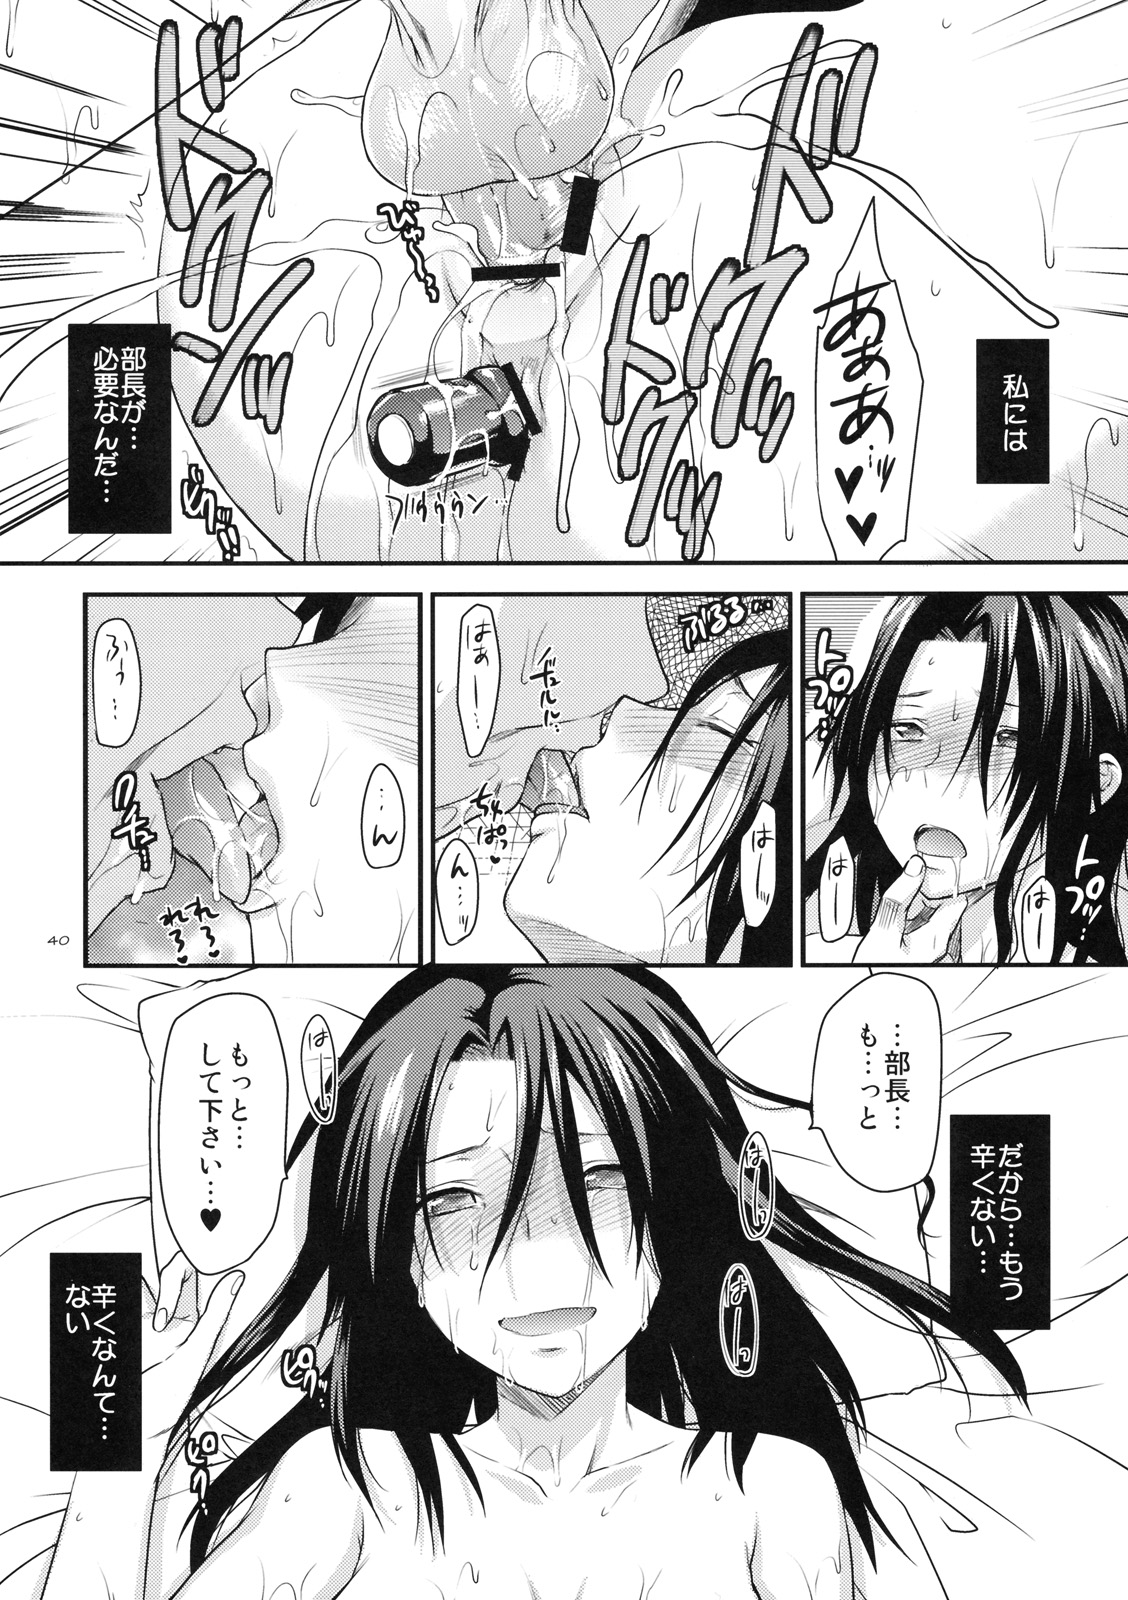 (SC49) [Lv.X+ (Yuzuki N Dash)] Another Another World page 39 full